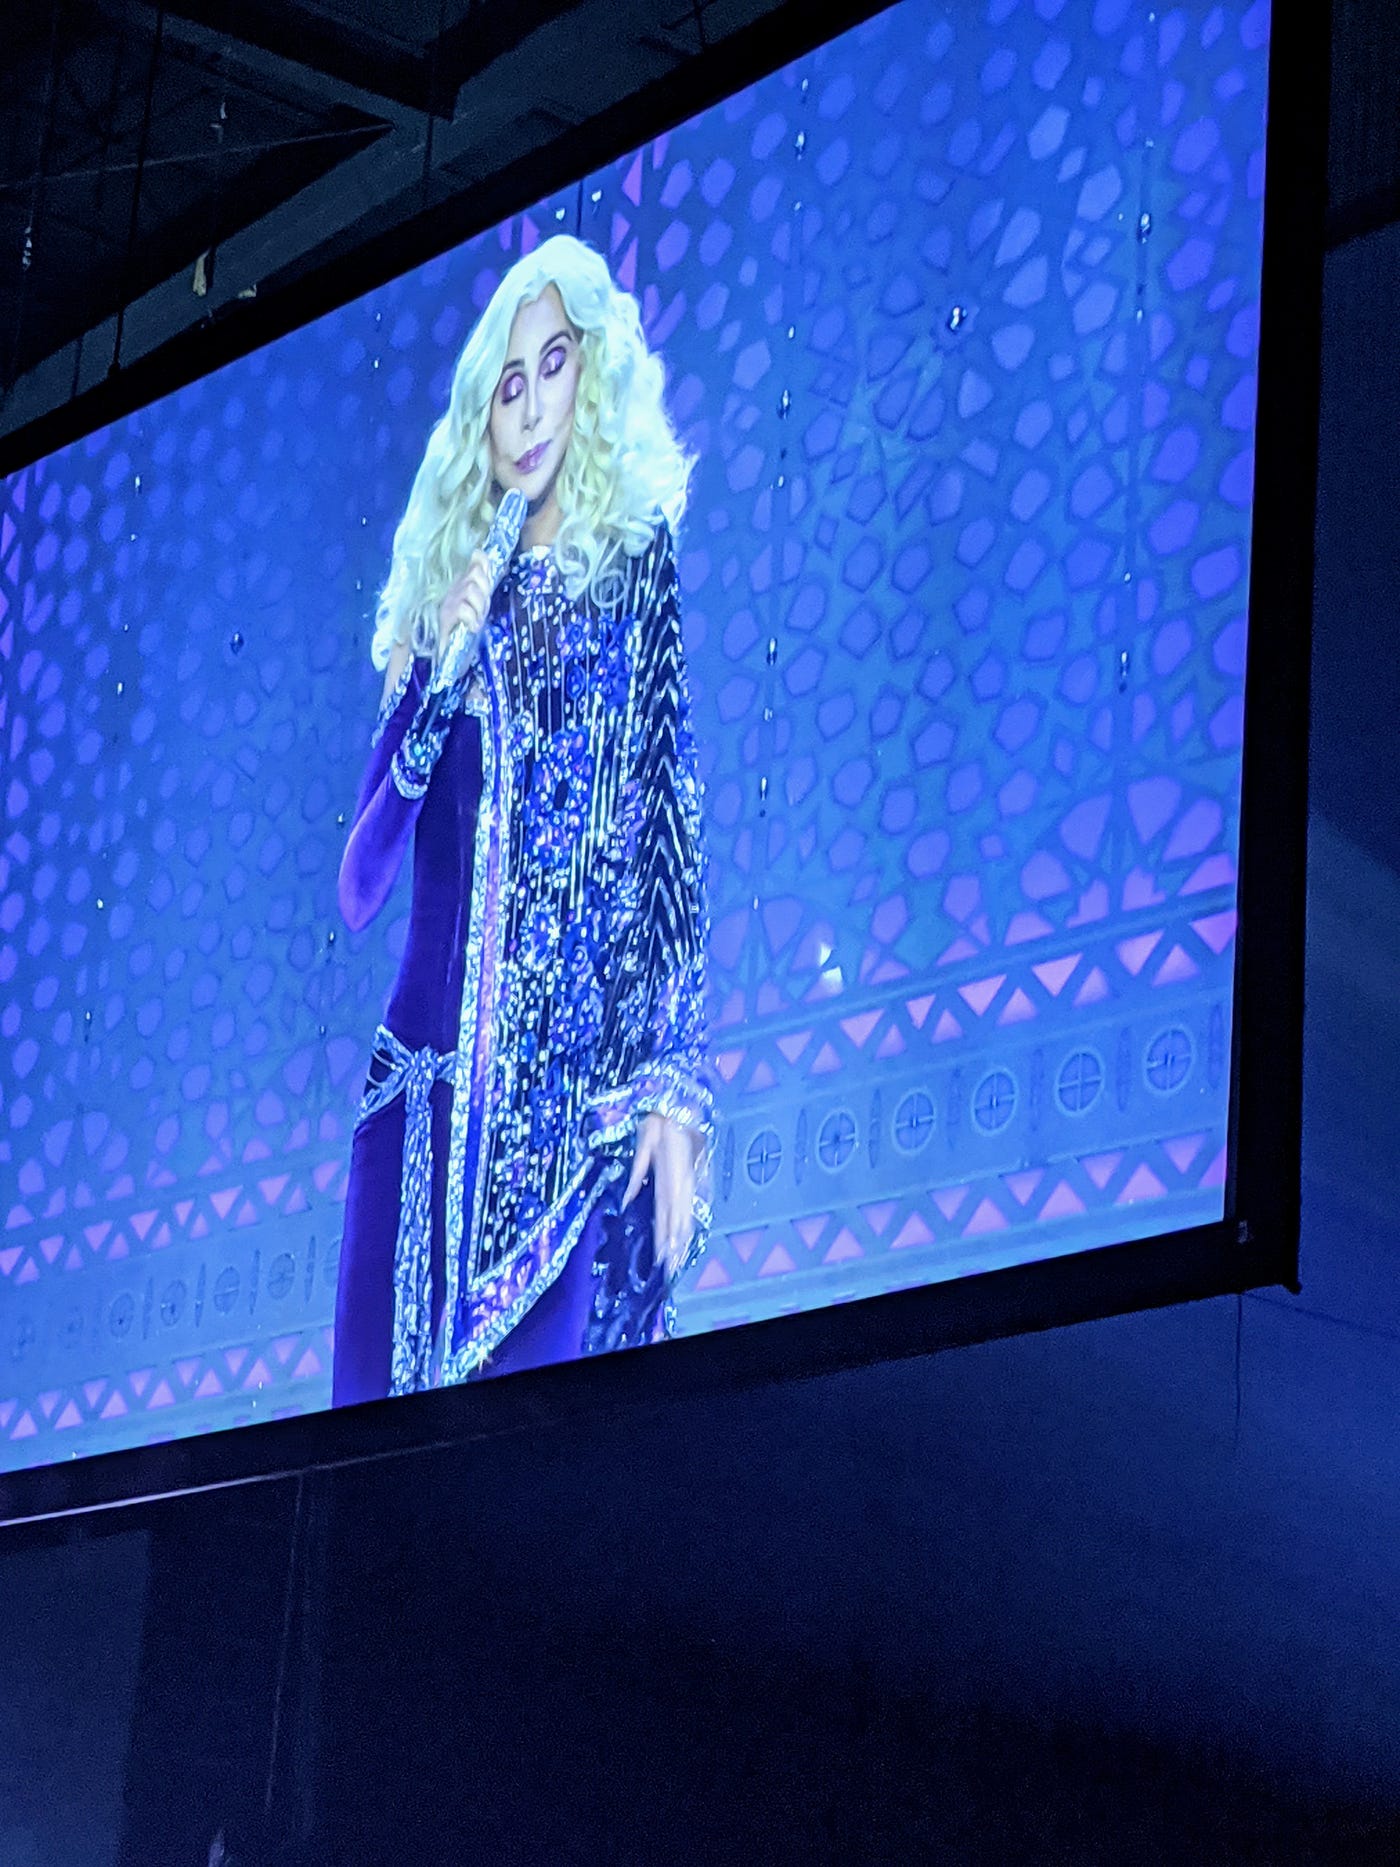 Cher on the jumbotron at her last concert before the 2020 tour was cancelled